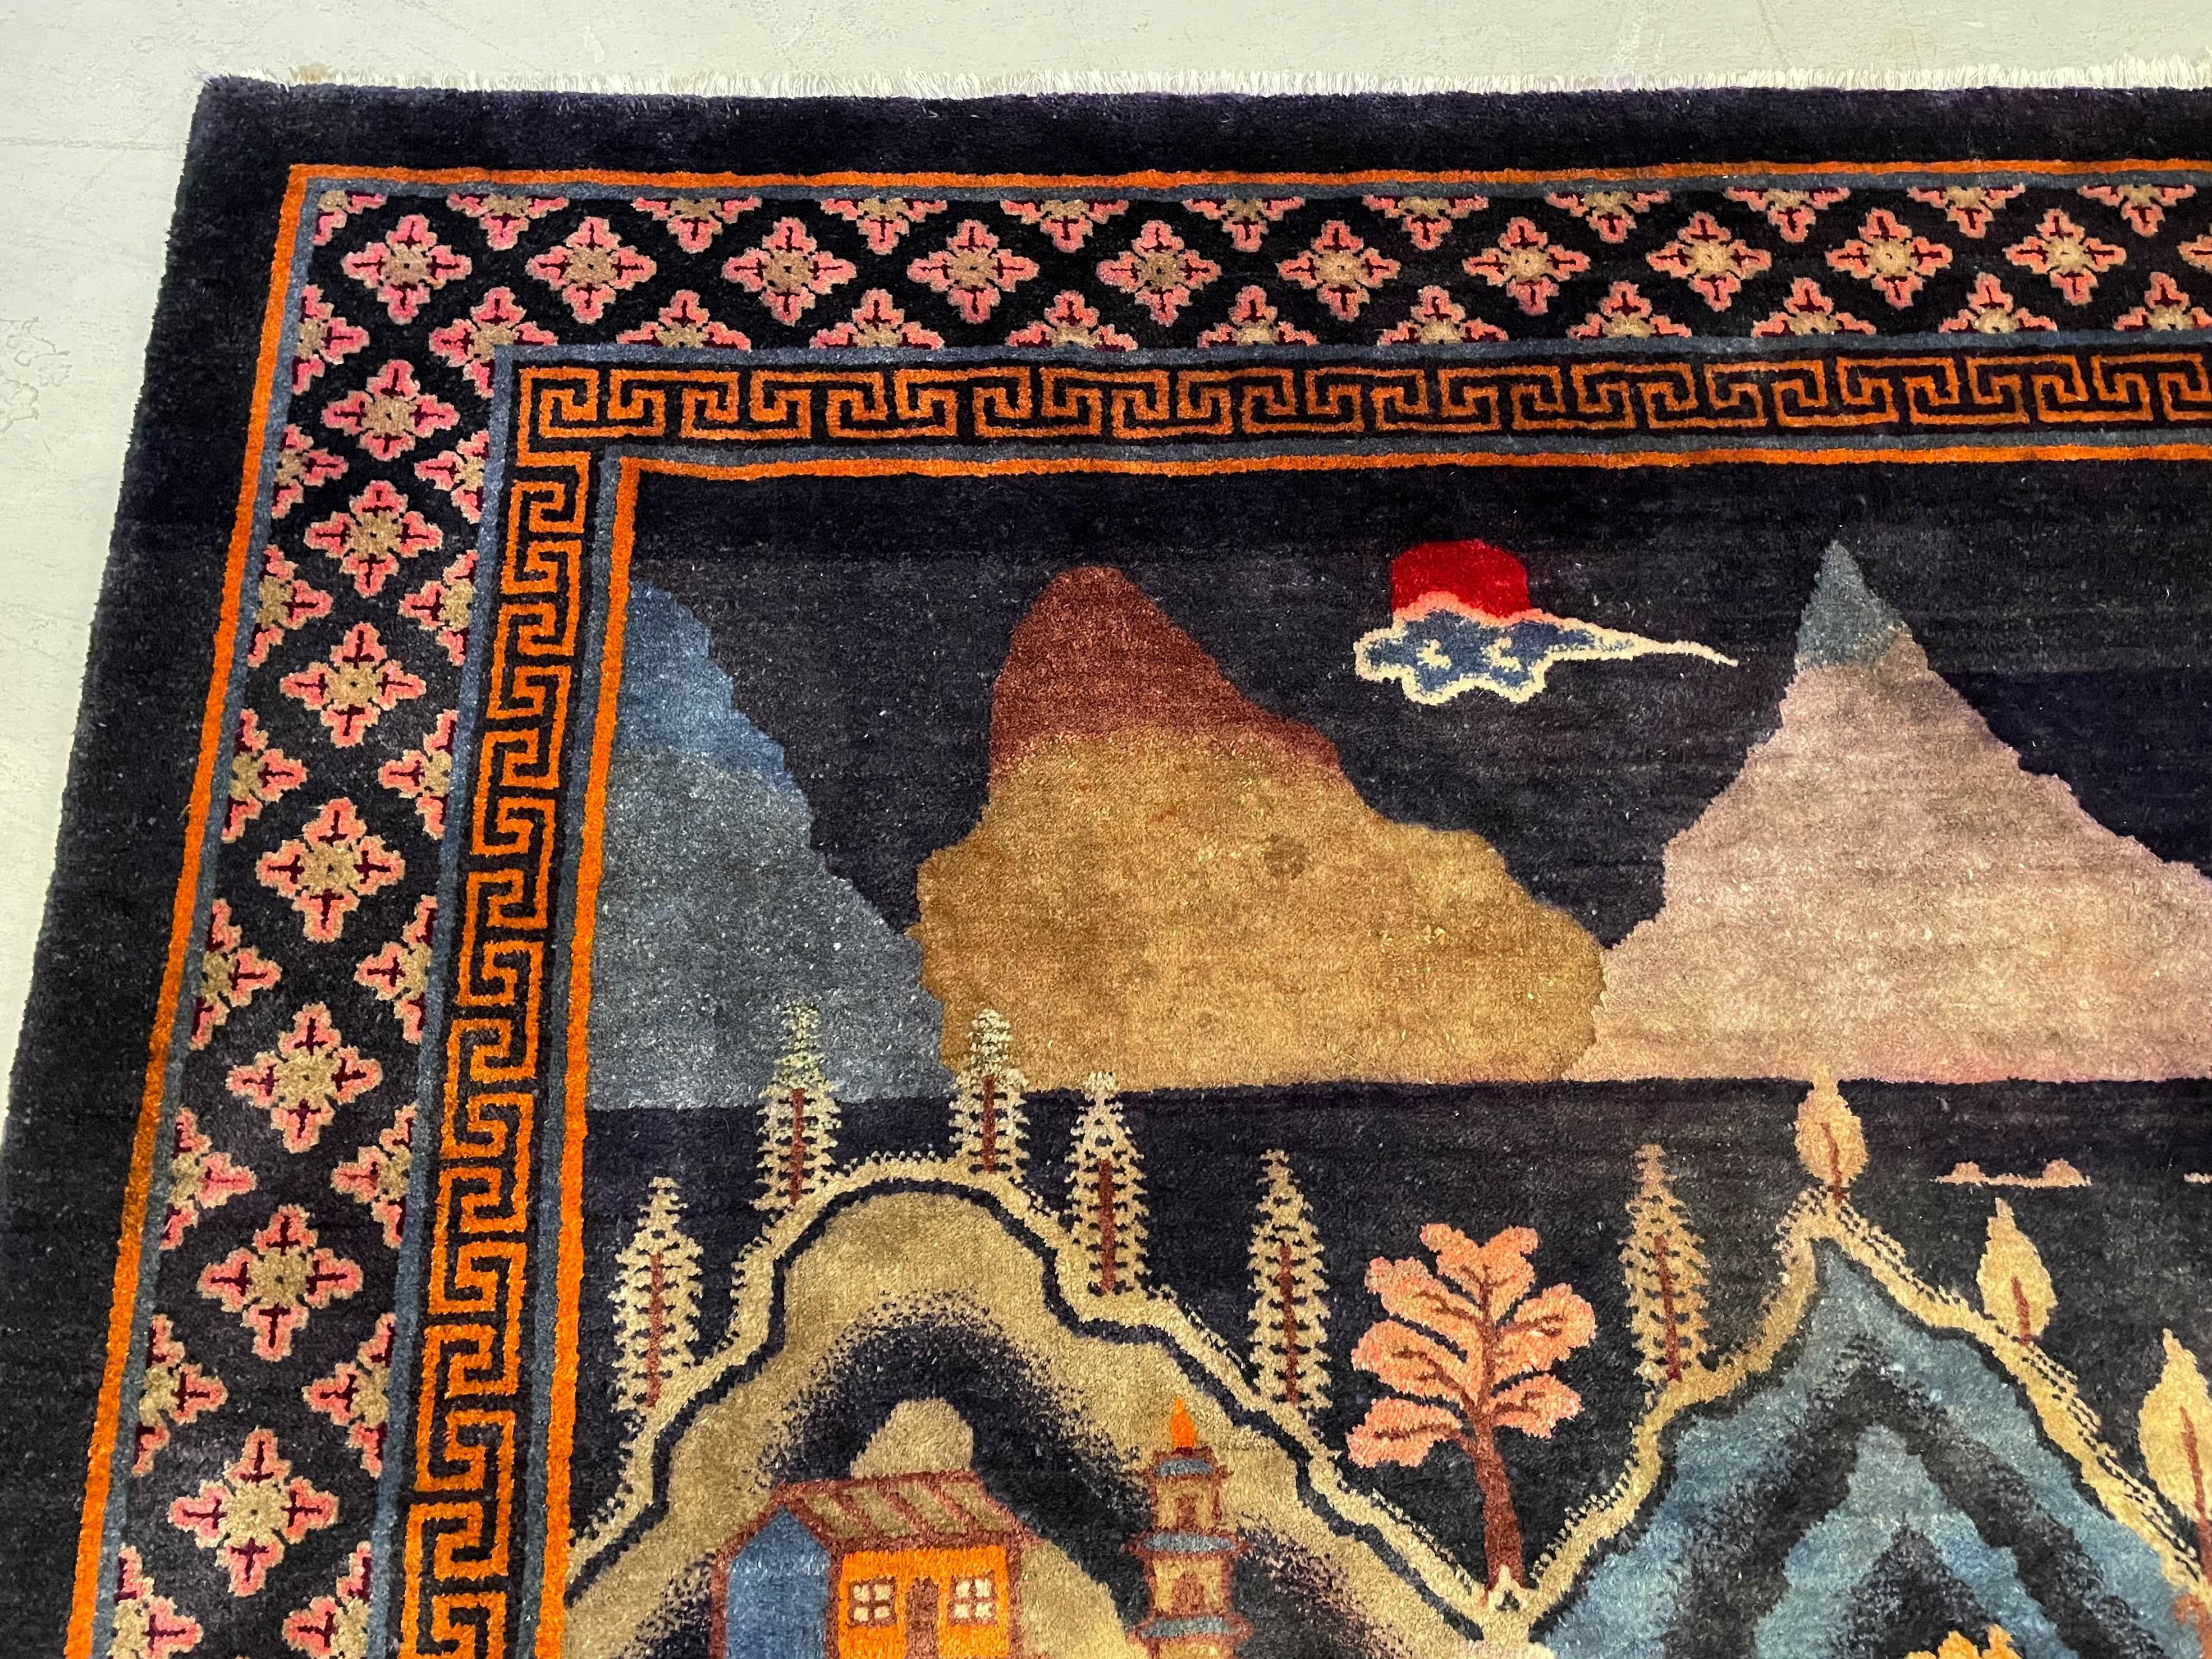 A Chinese Art Deco pictorial landscape wool rug from Baotou in the Inner Mongolia region. Beautifully scenic view of a village on a lake surrounded by mountains with trees, houses, a pagoda and a bridge or aqueduct. Rich saturated color, the main